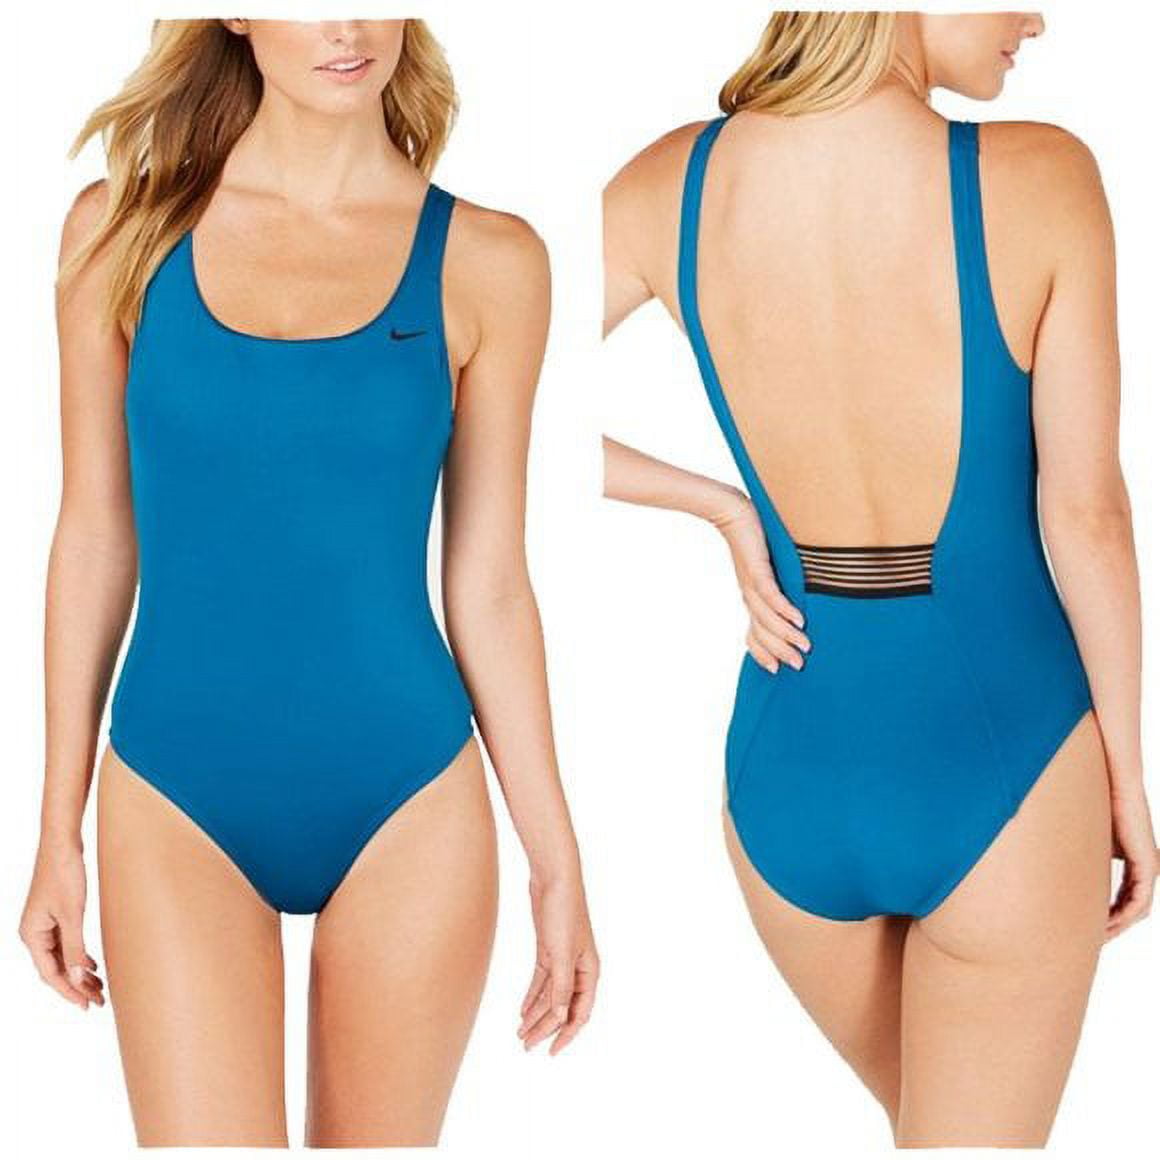 Nike Women's Essential Solid U Back One Piece Swimsuit at